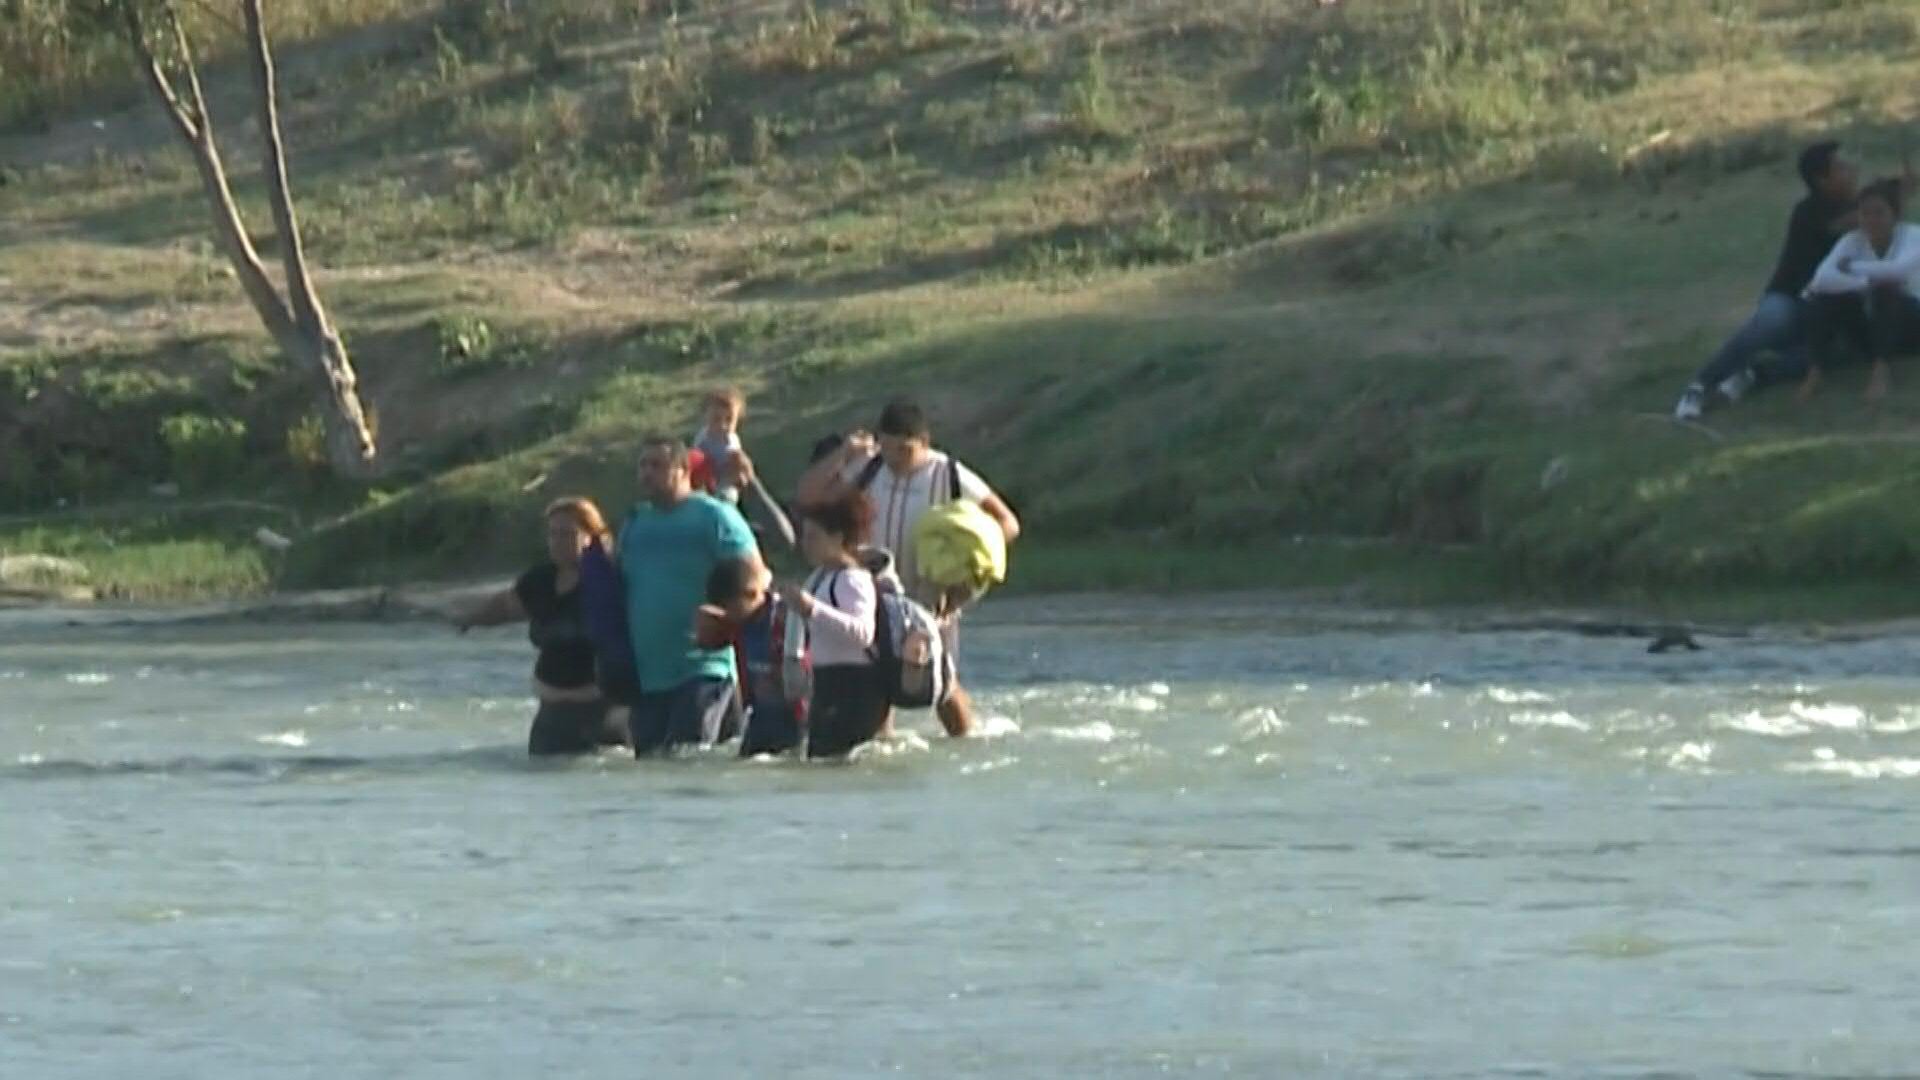 Migrants cross the Rio Grande from the Mexican city of Pietras Negras to Eagle Pass, Texas.